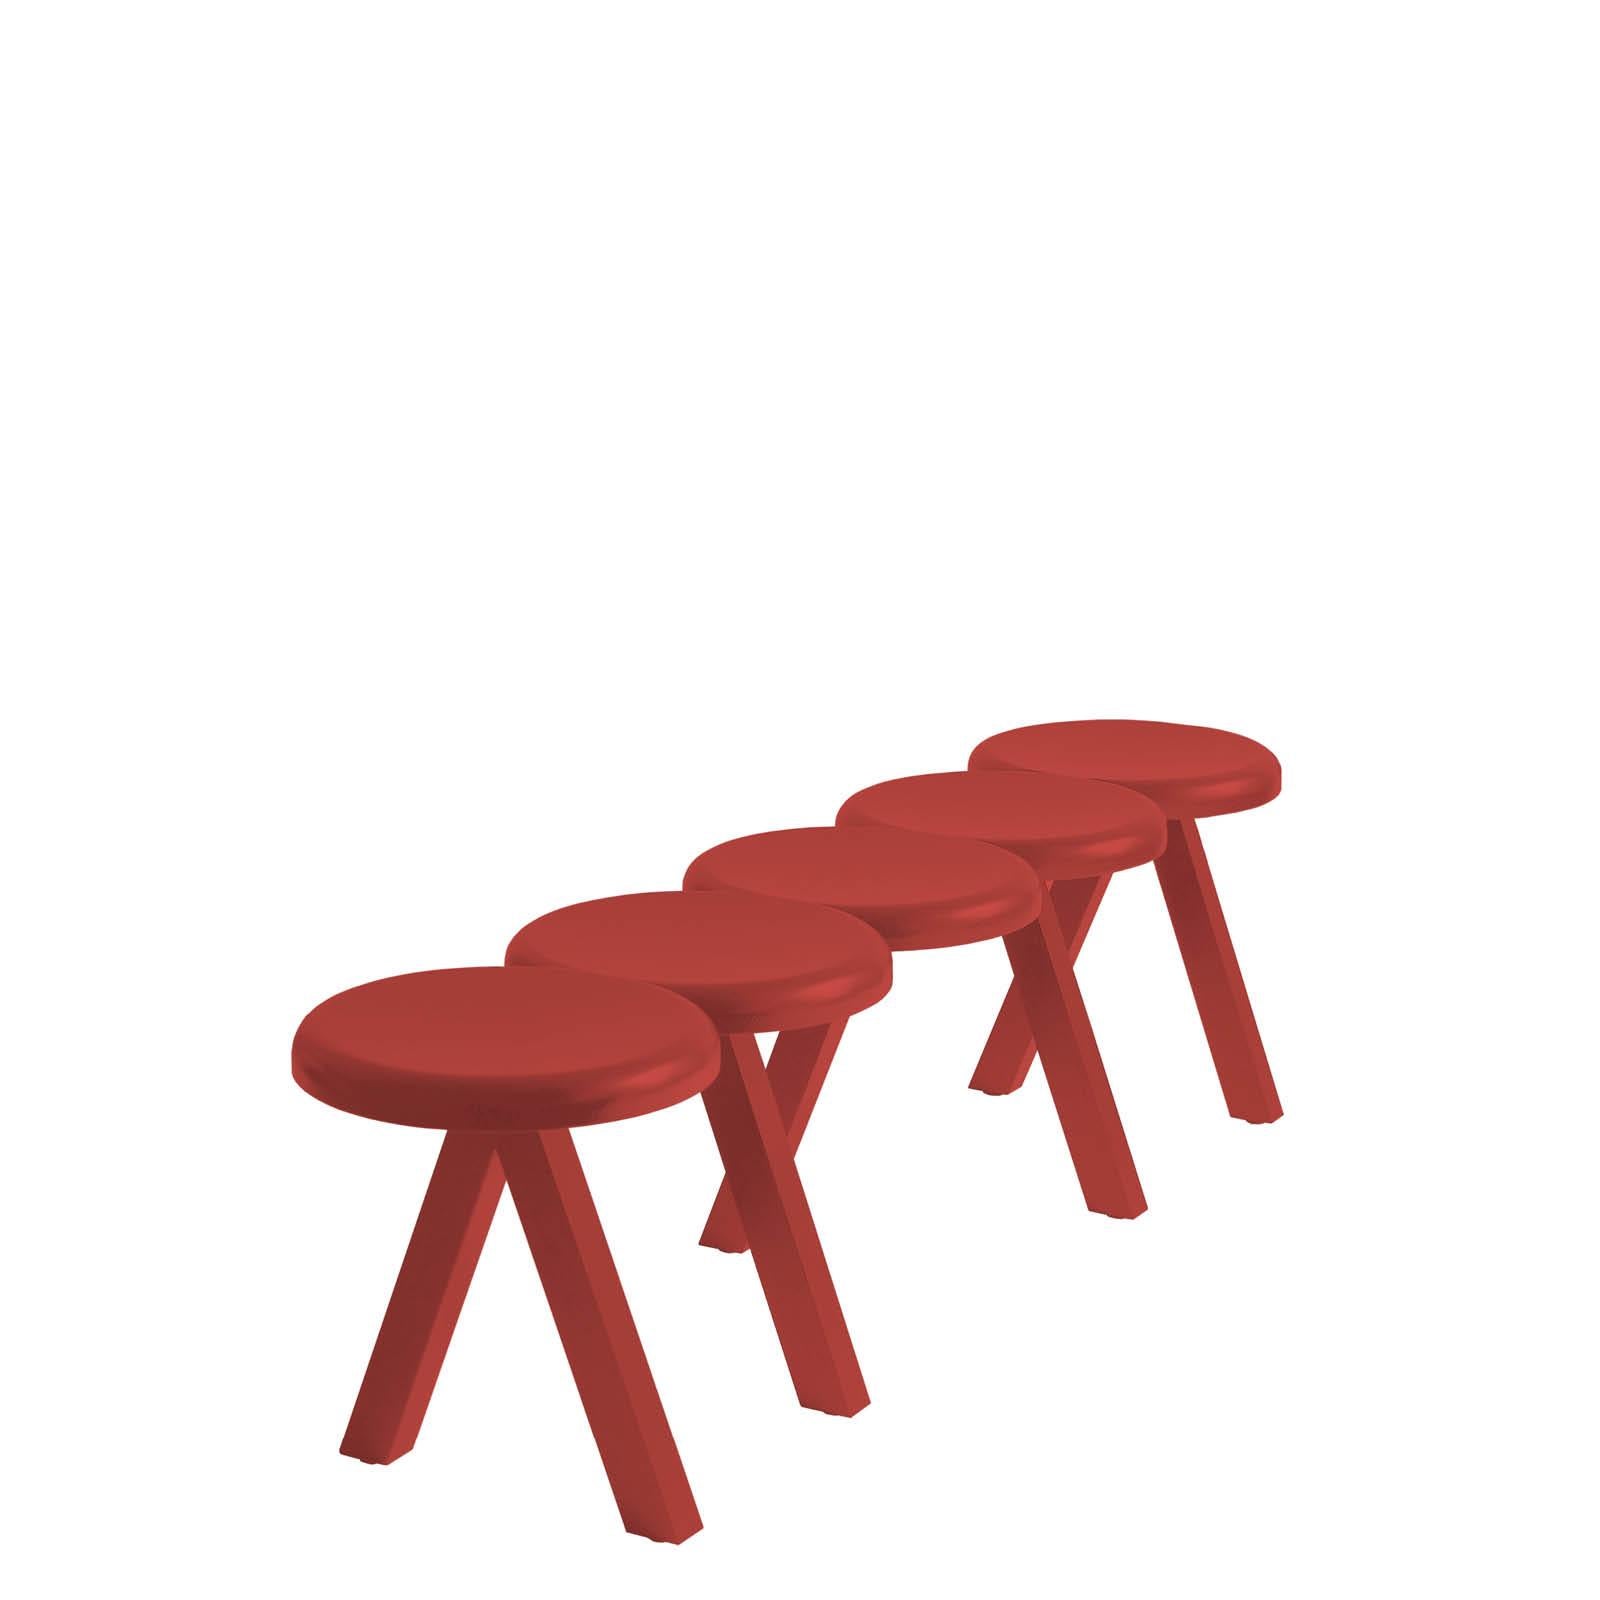 Painted MILLEPIEDI Stool by Studio Catoir for Driade For Sale